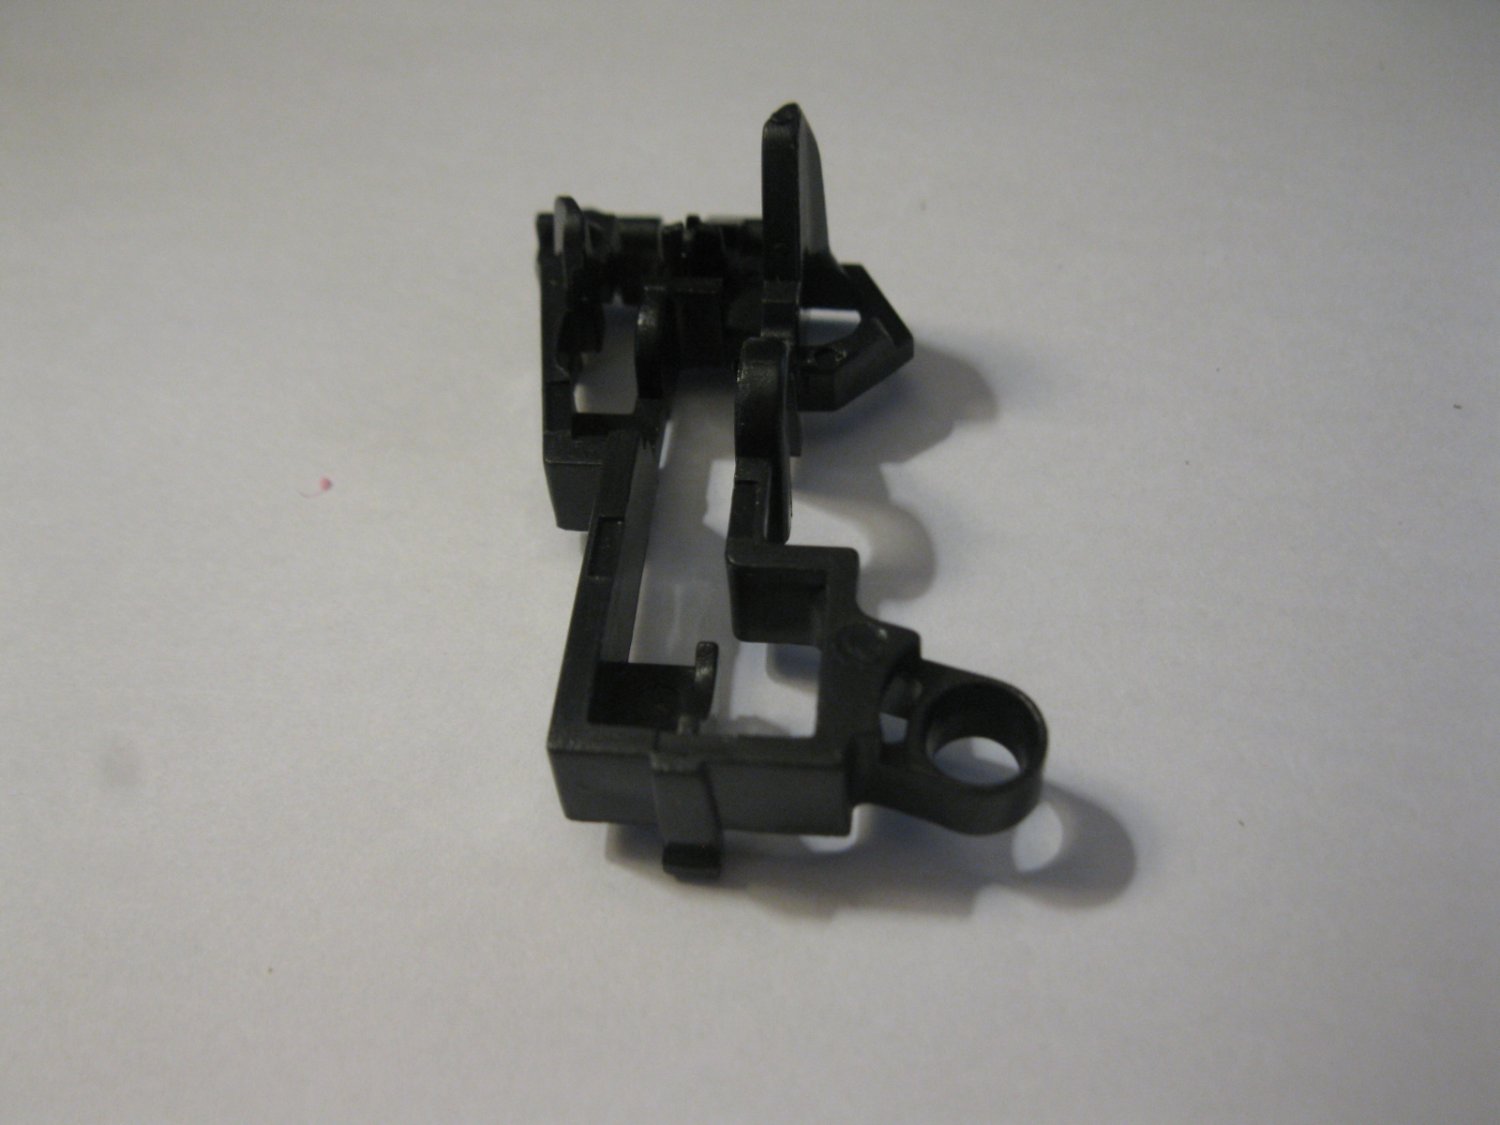 Xbox 360 Wireless Controller Replacement part- Right Trigger Internal Braclet